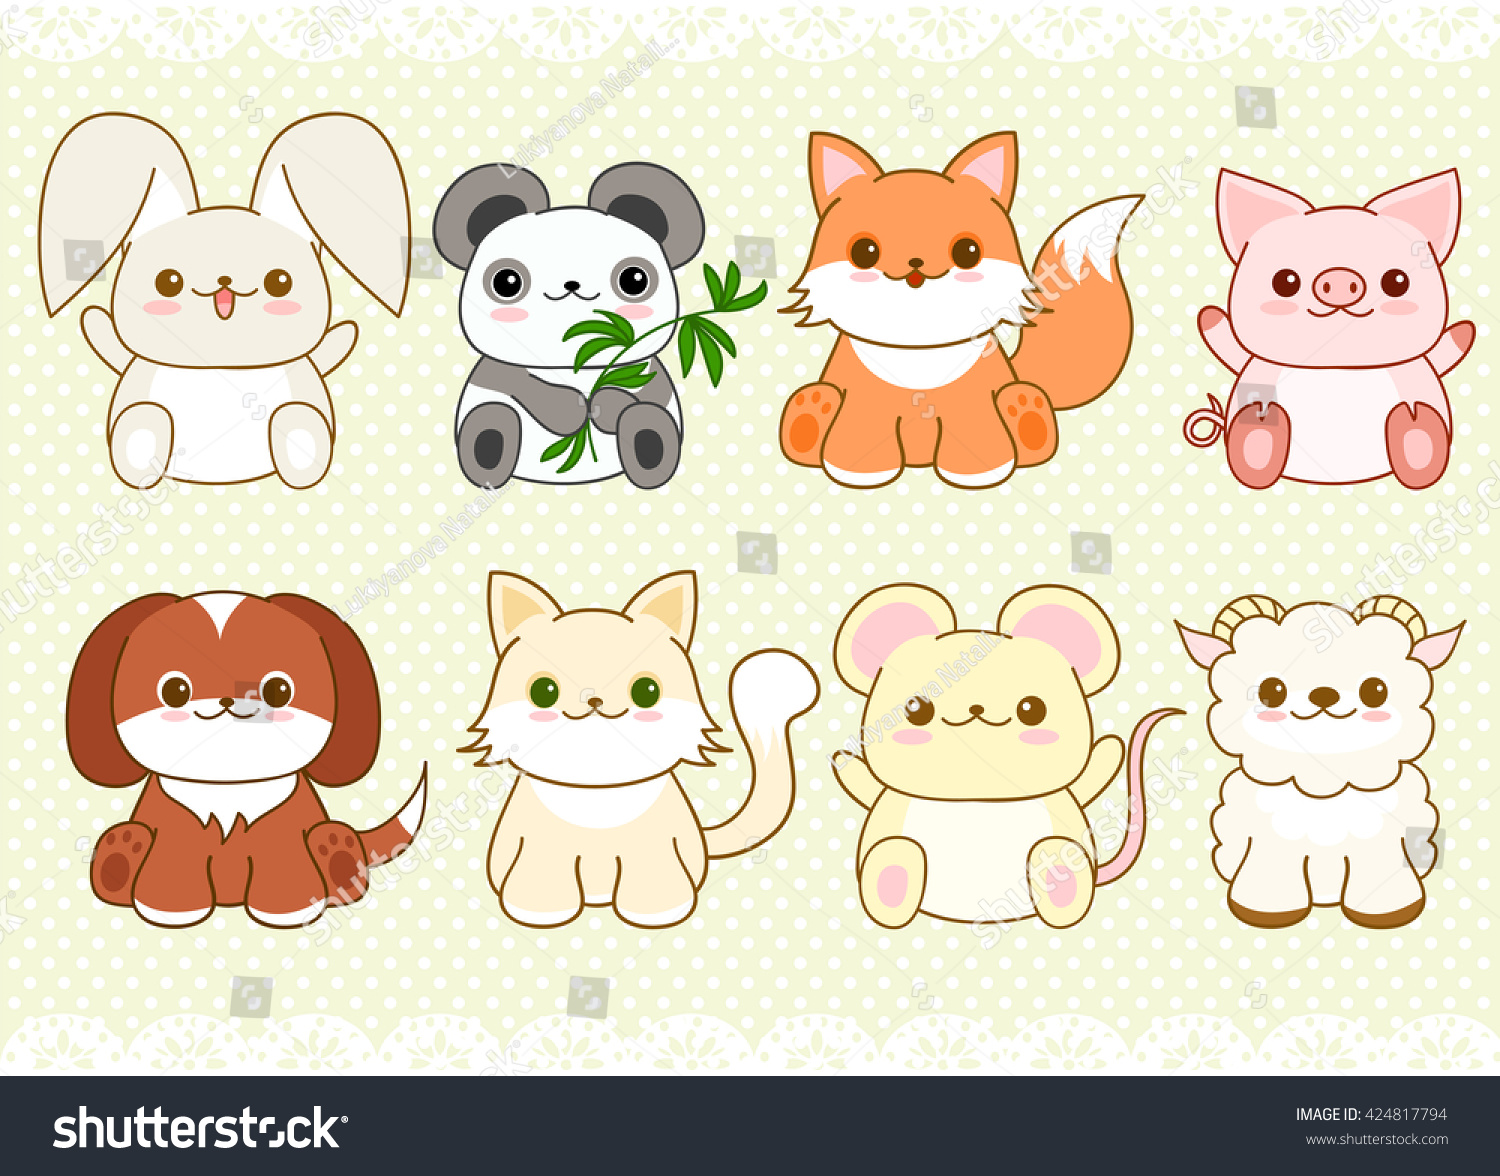 Collection Of Cute Baby Animals In Kawaii Style. Cat, Dog, Pig, Rabbit